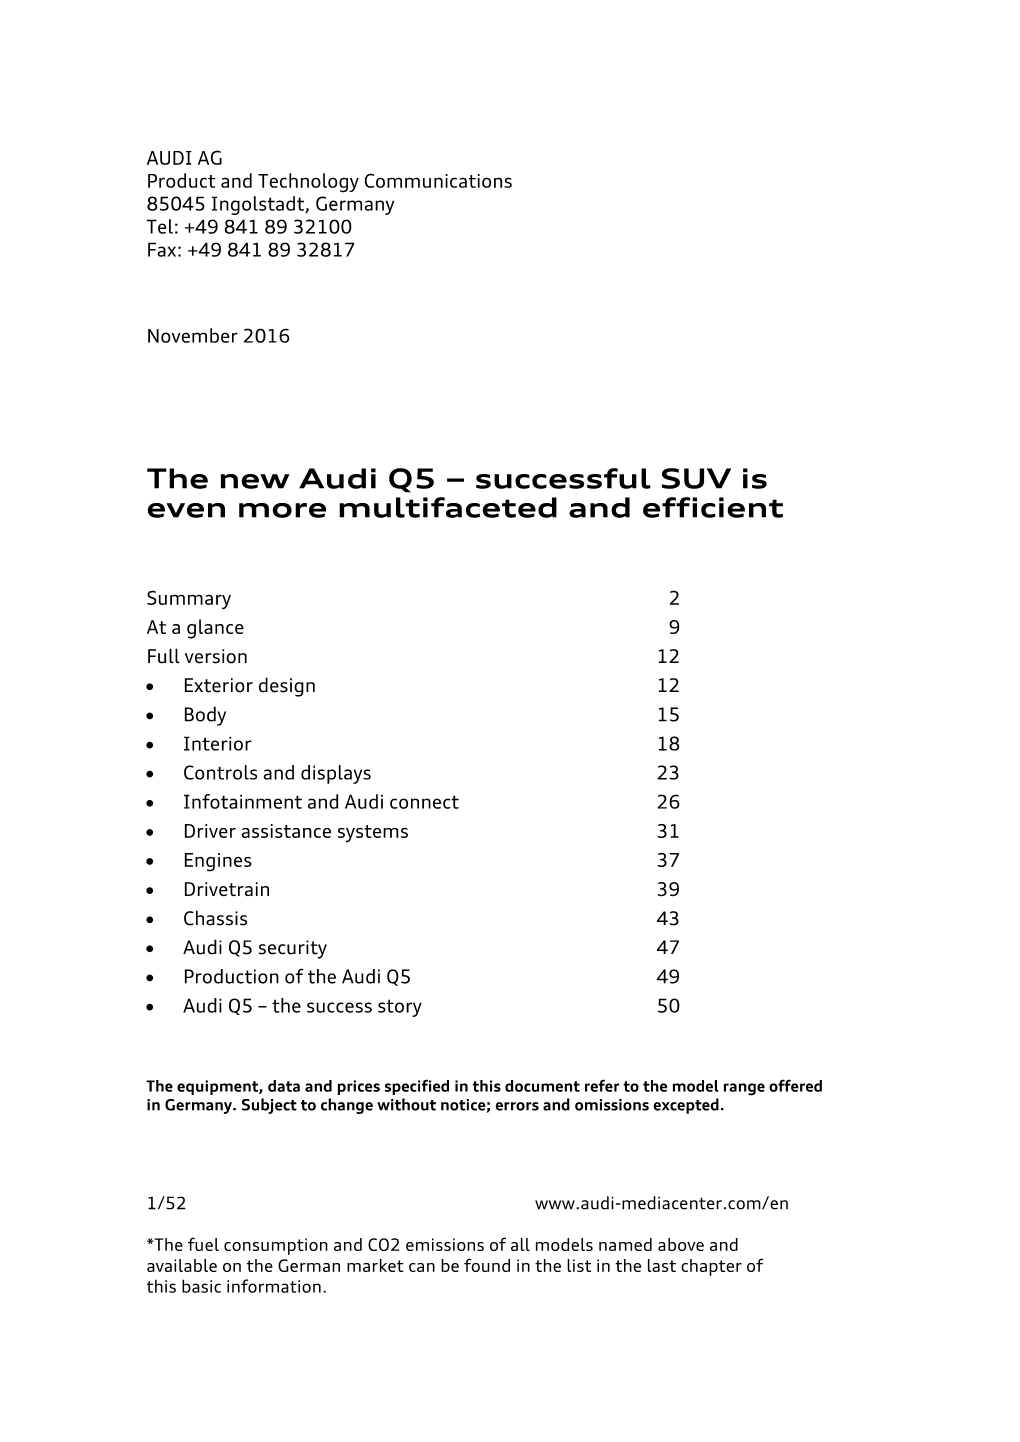 AUDI AG Product and Technology Communications 85045 Ingolstadt, Germany Tel: +49 841 89 32100 Fax: +49 841 89 32817